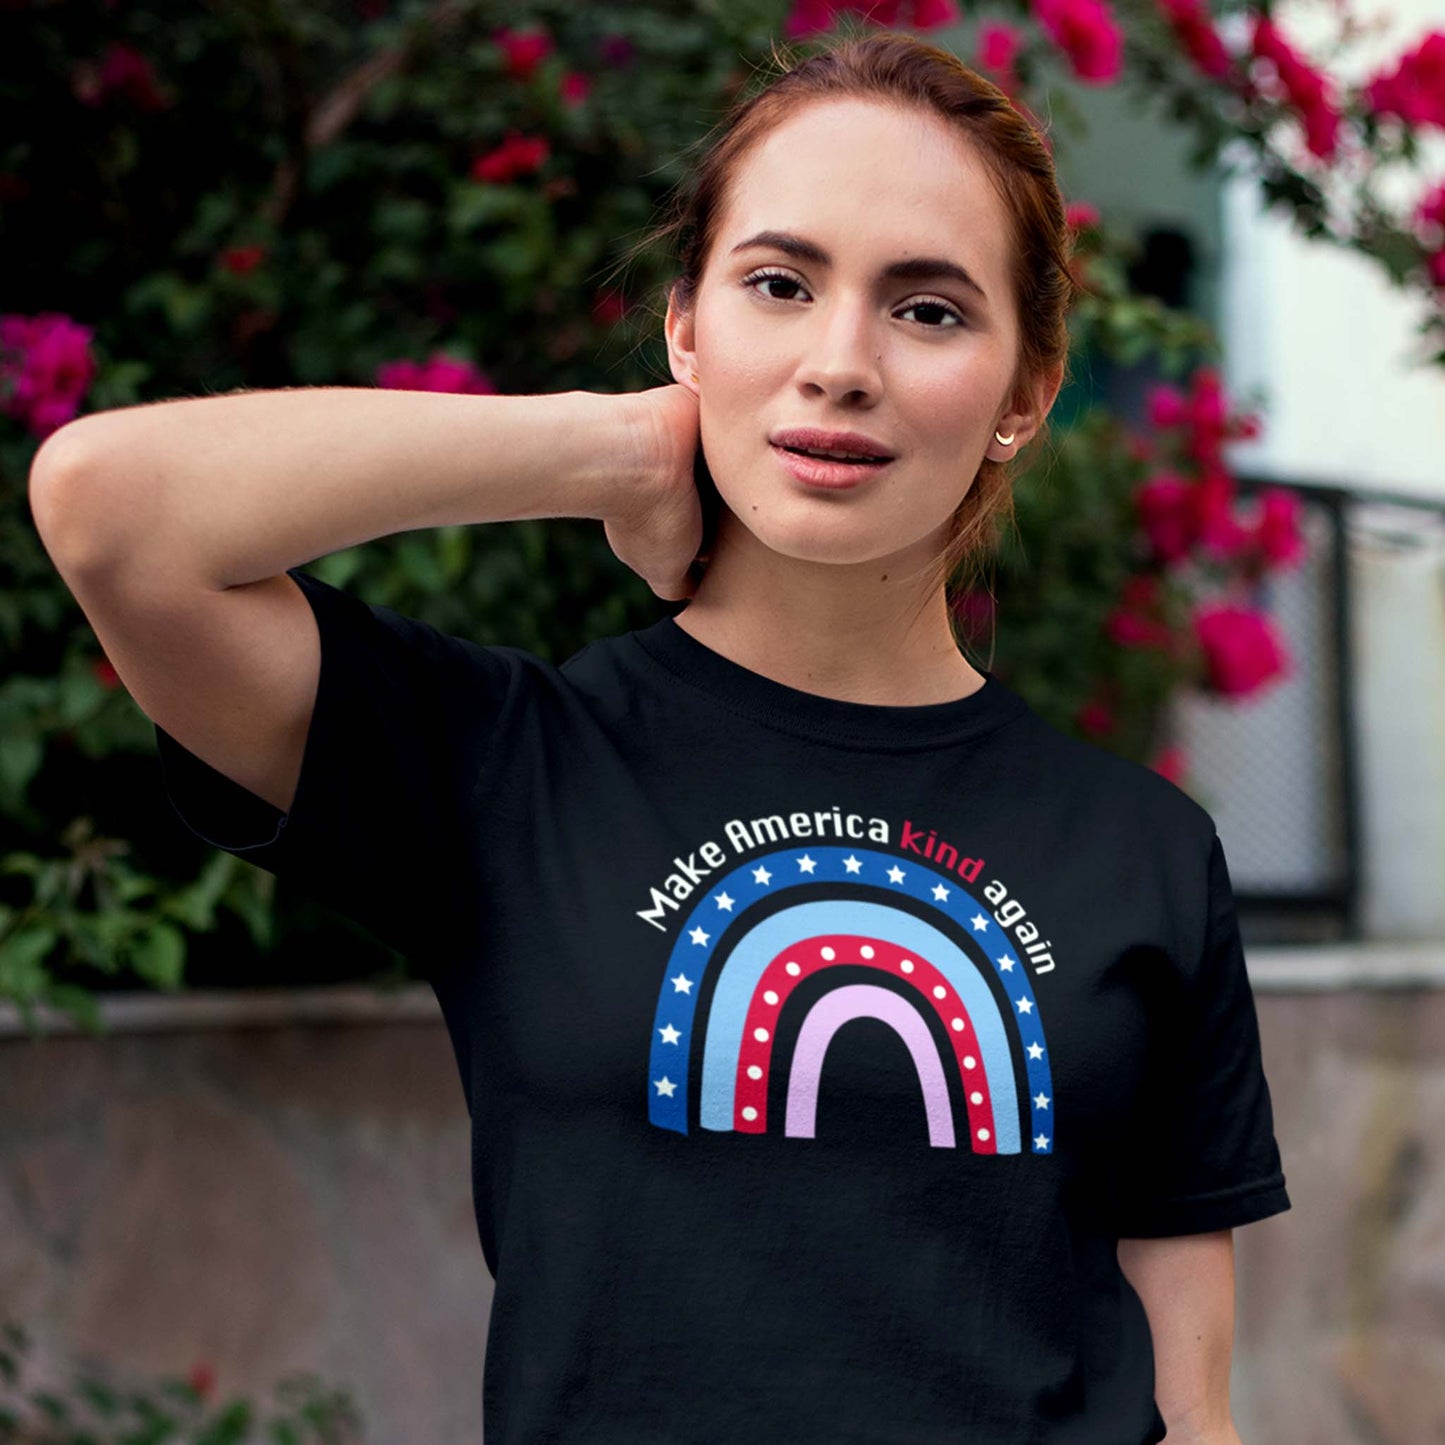 Black unisex t-shirt with a graphic of a red and blue rainbow with text arched over the top that says, “Make America Kind Again”.